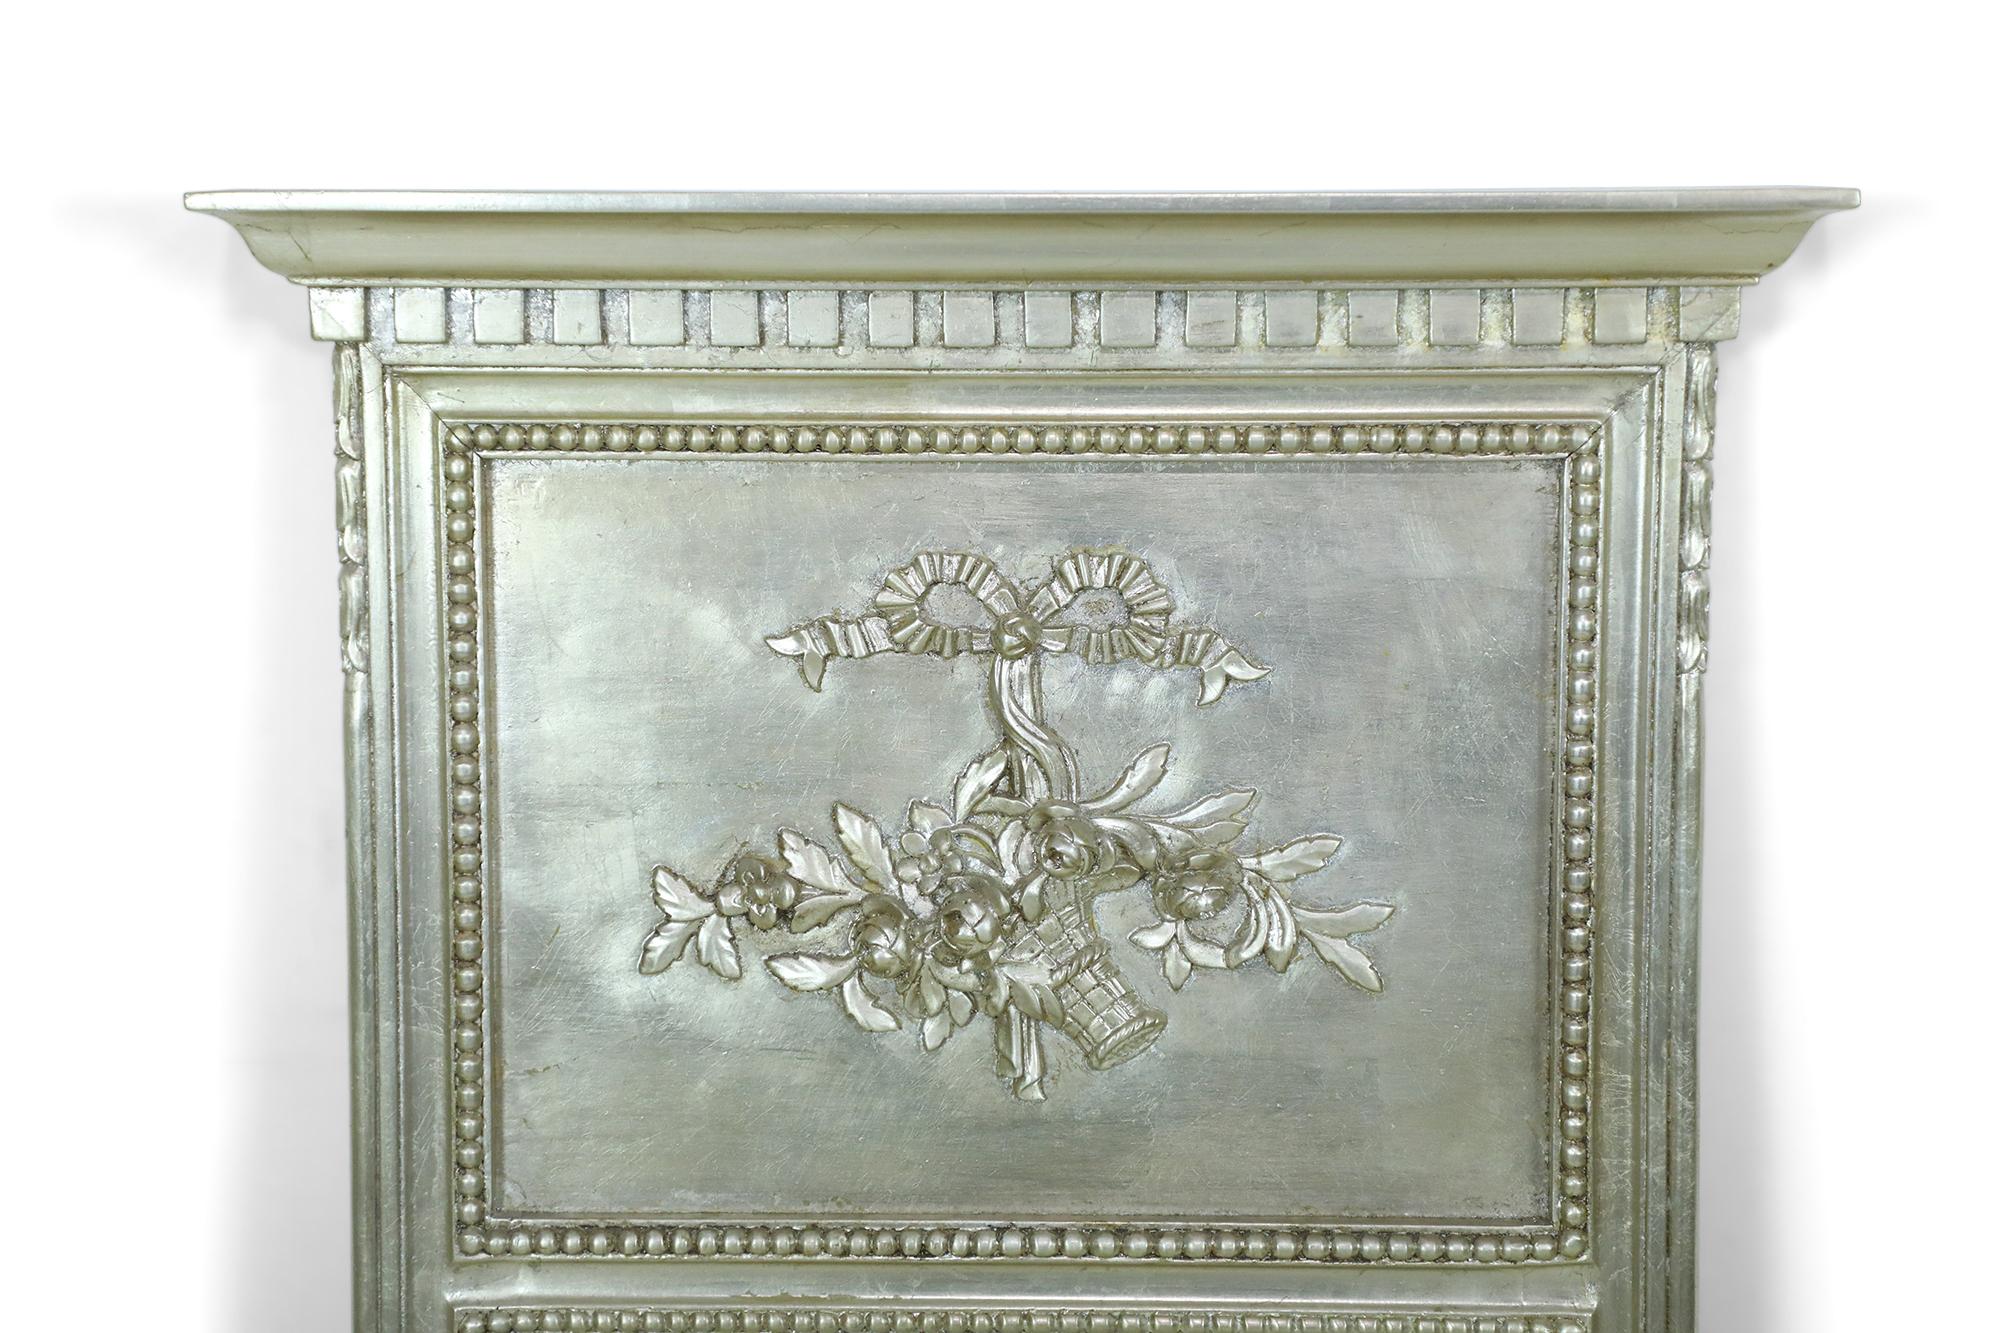 Italian Neo-classical style (20th Century) pier mirror in painted silver with beading and decorative foliate upper section.